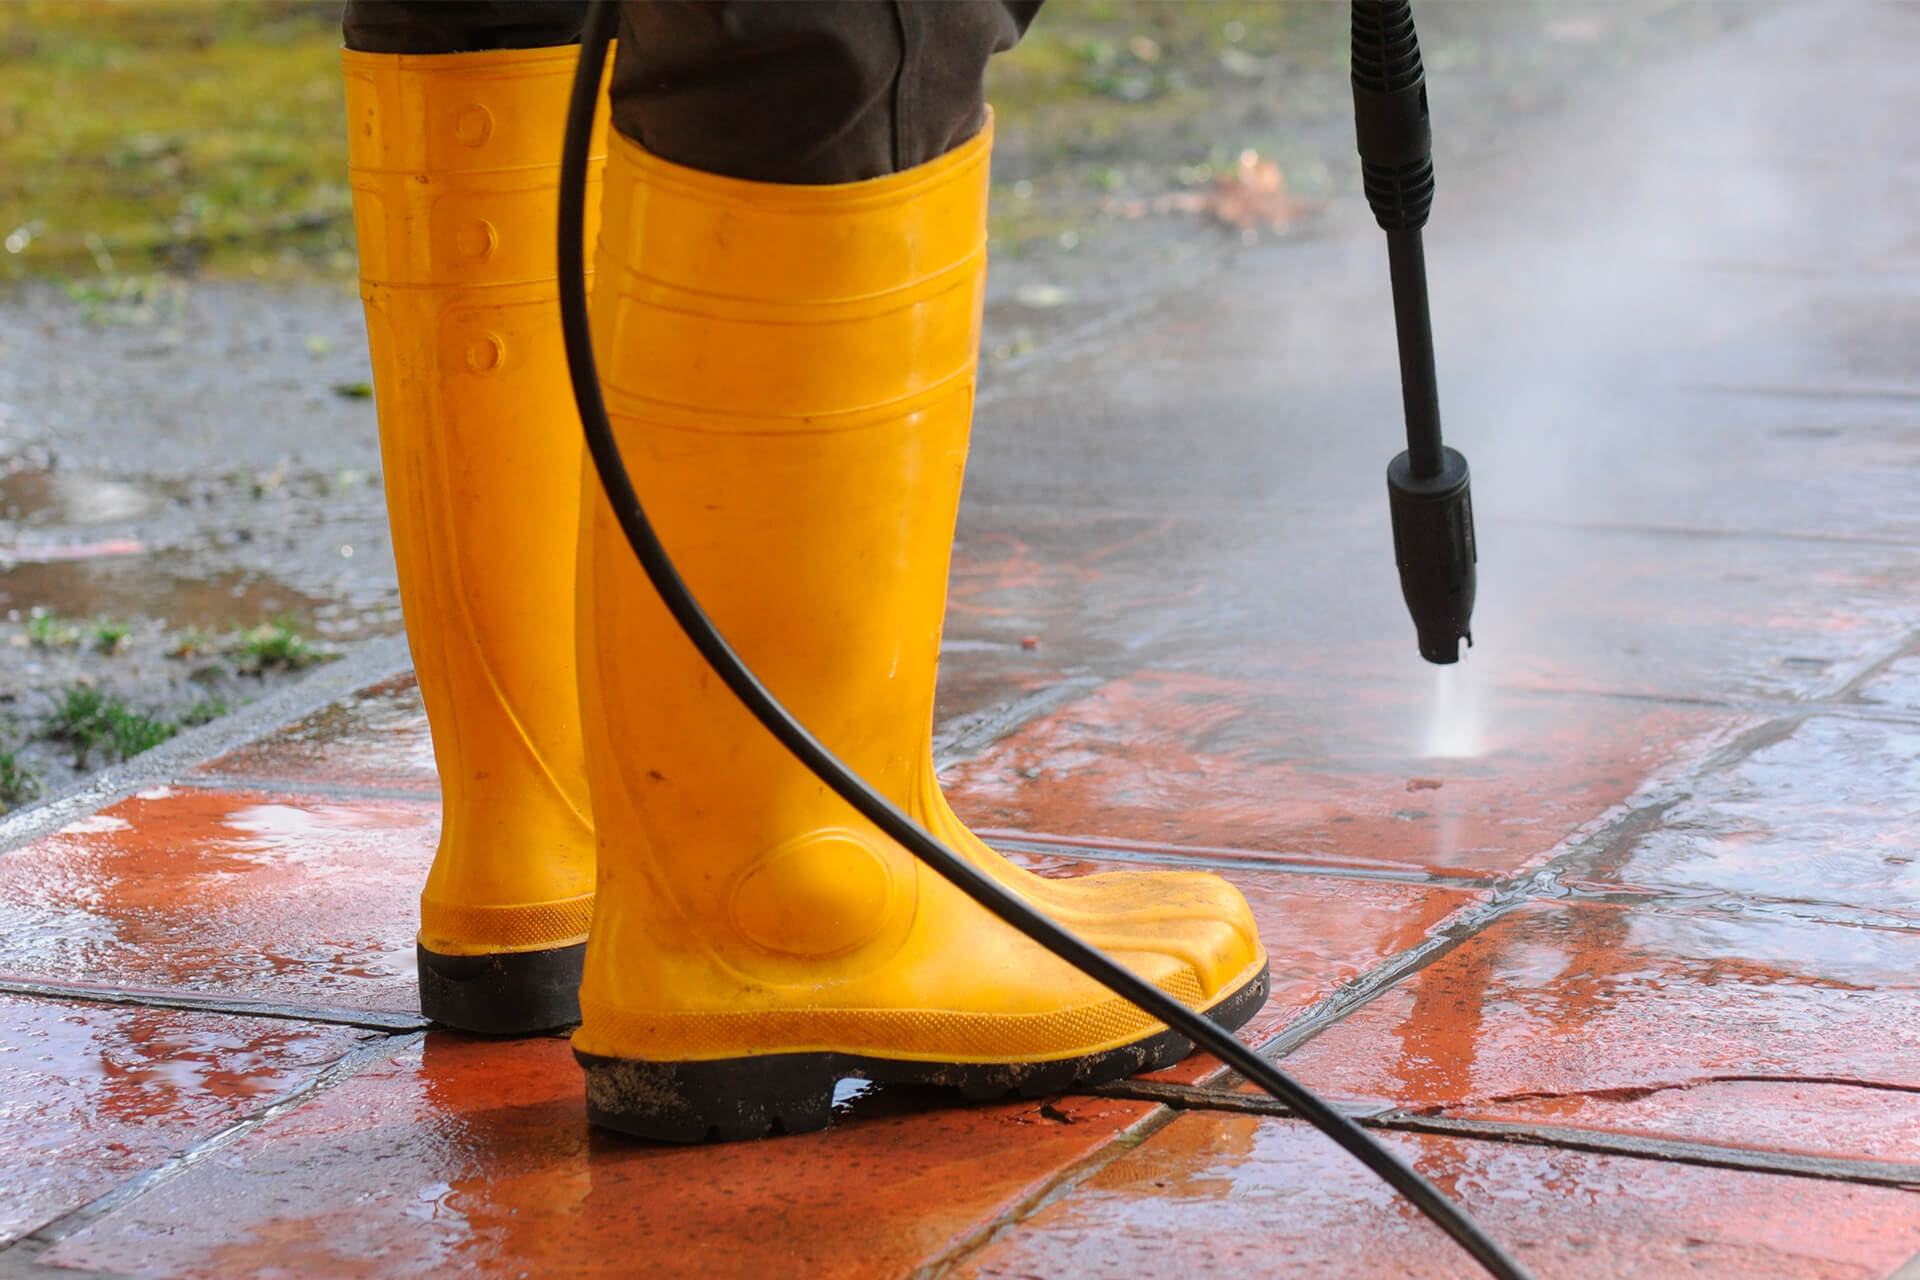 Person with yellow rubber boots using a pressure washer